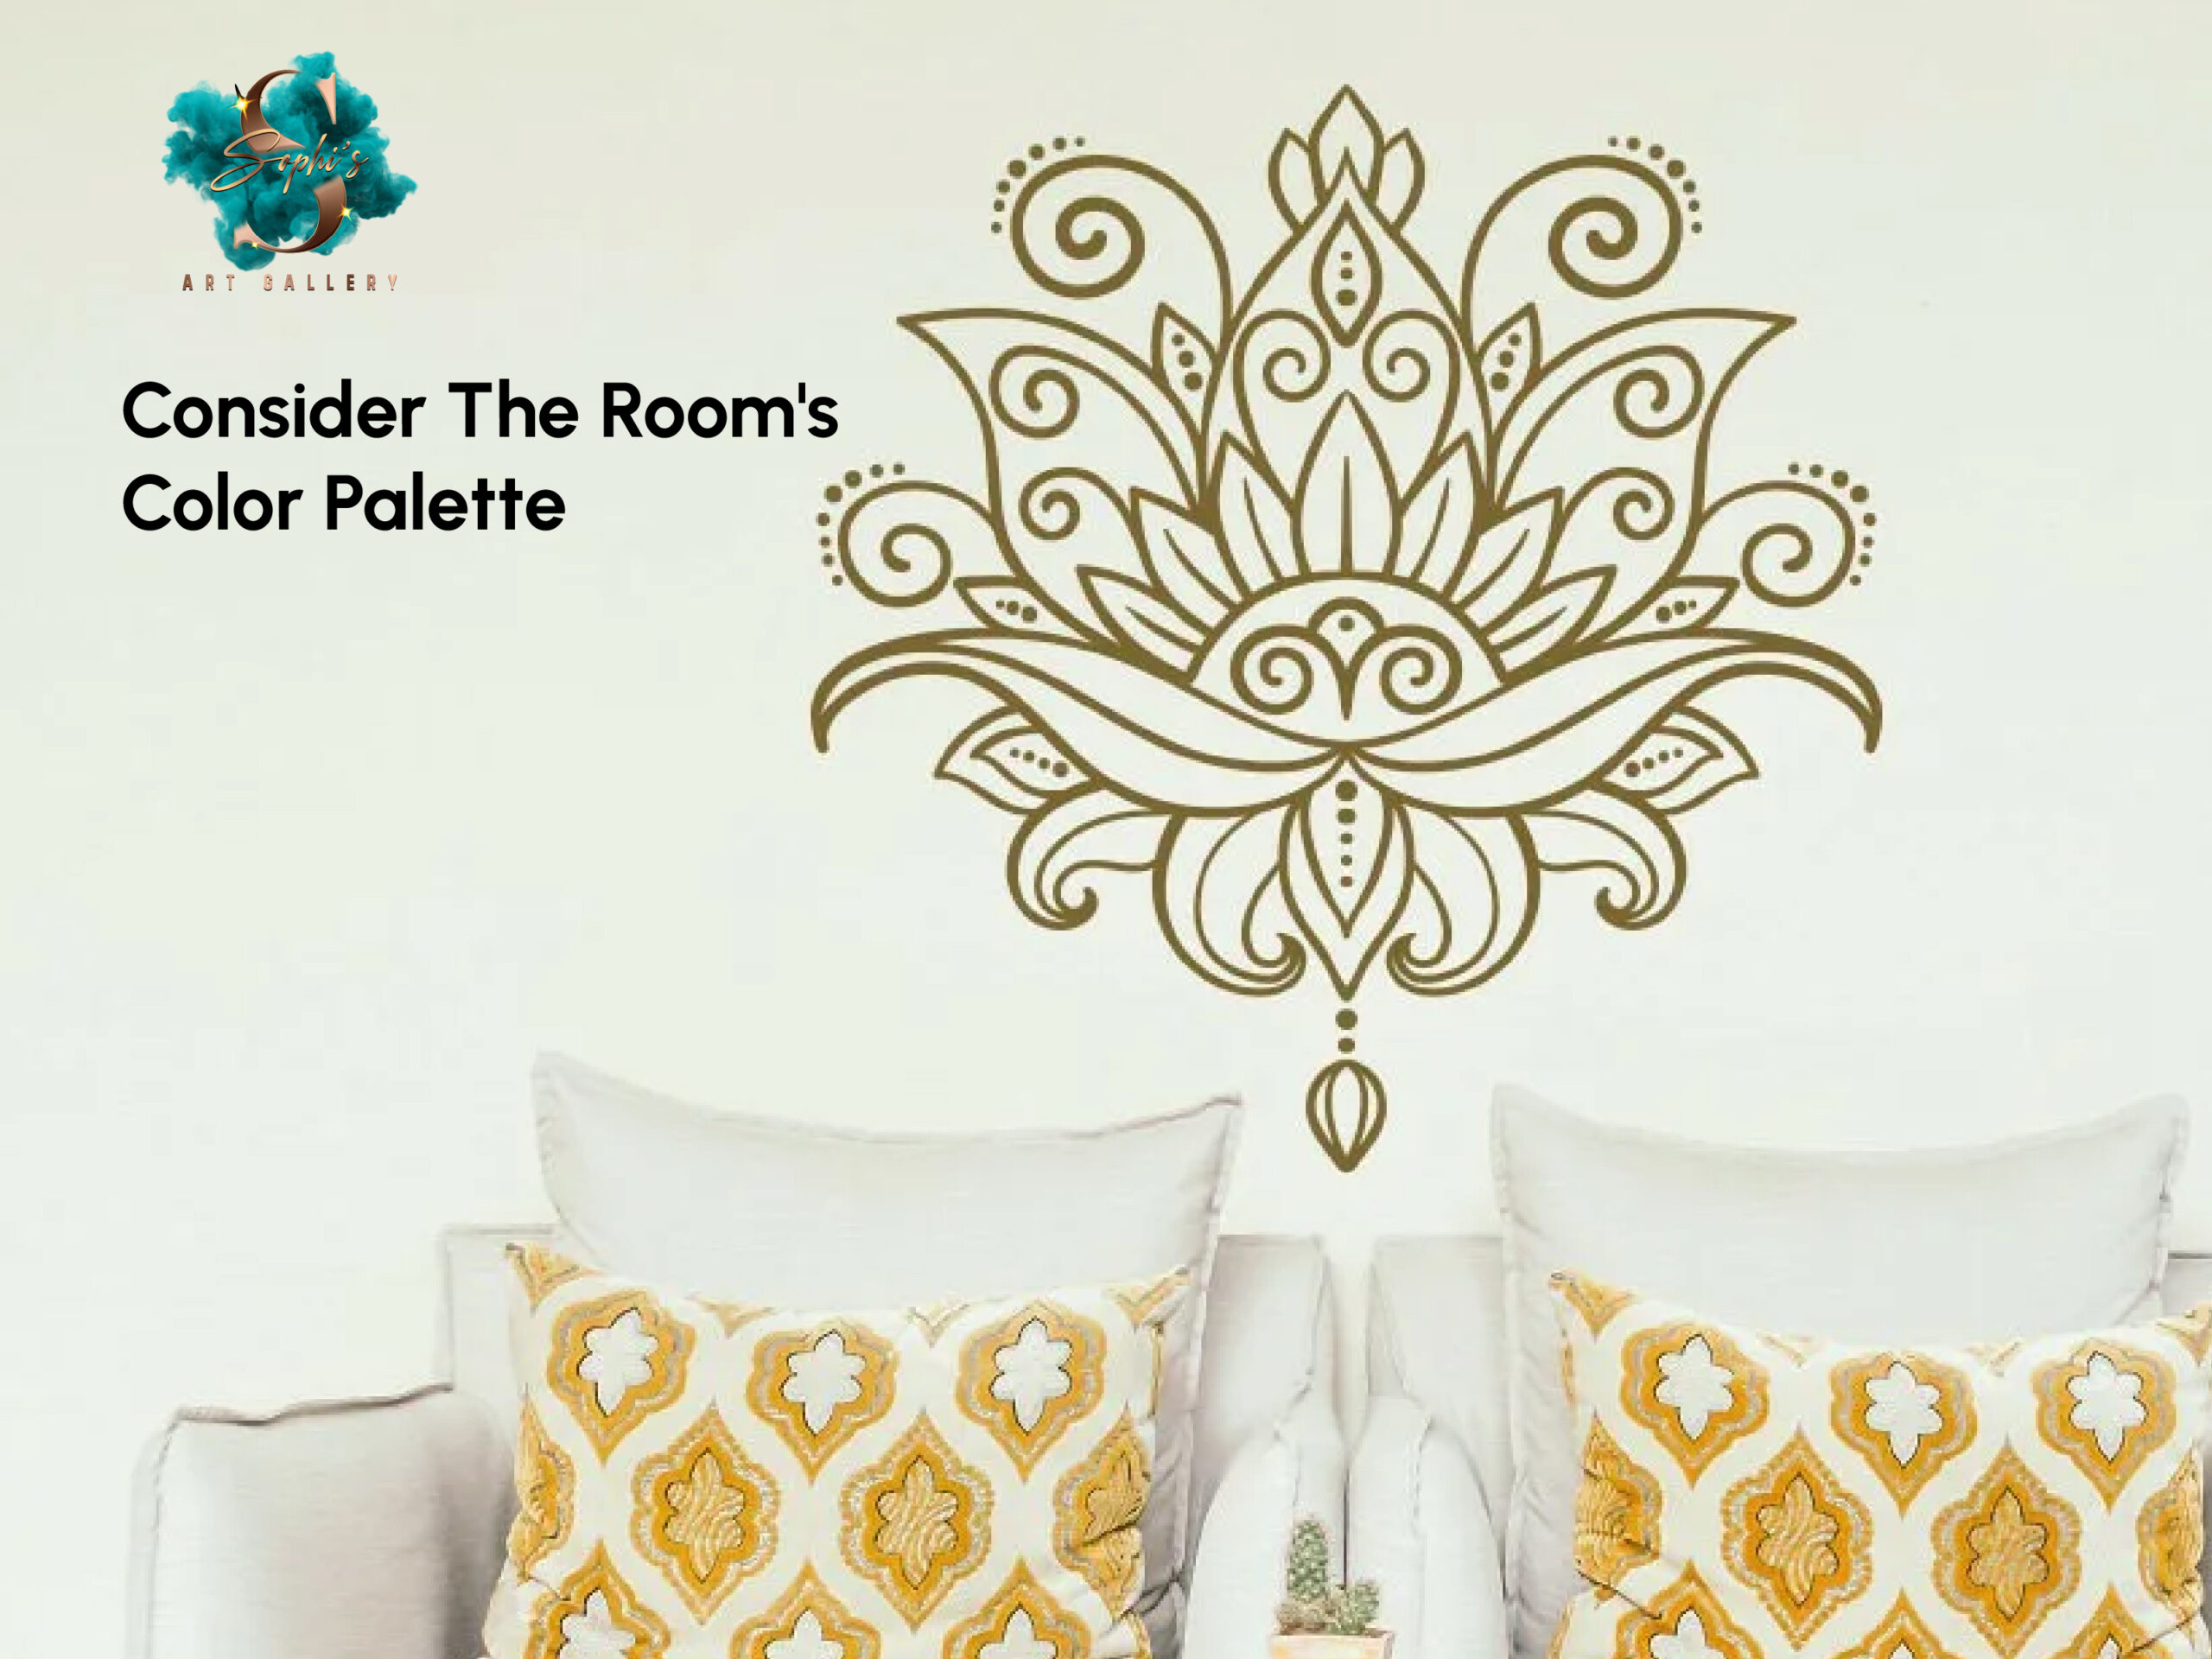 Consider The Room's Color Palette